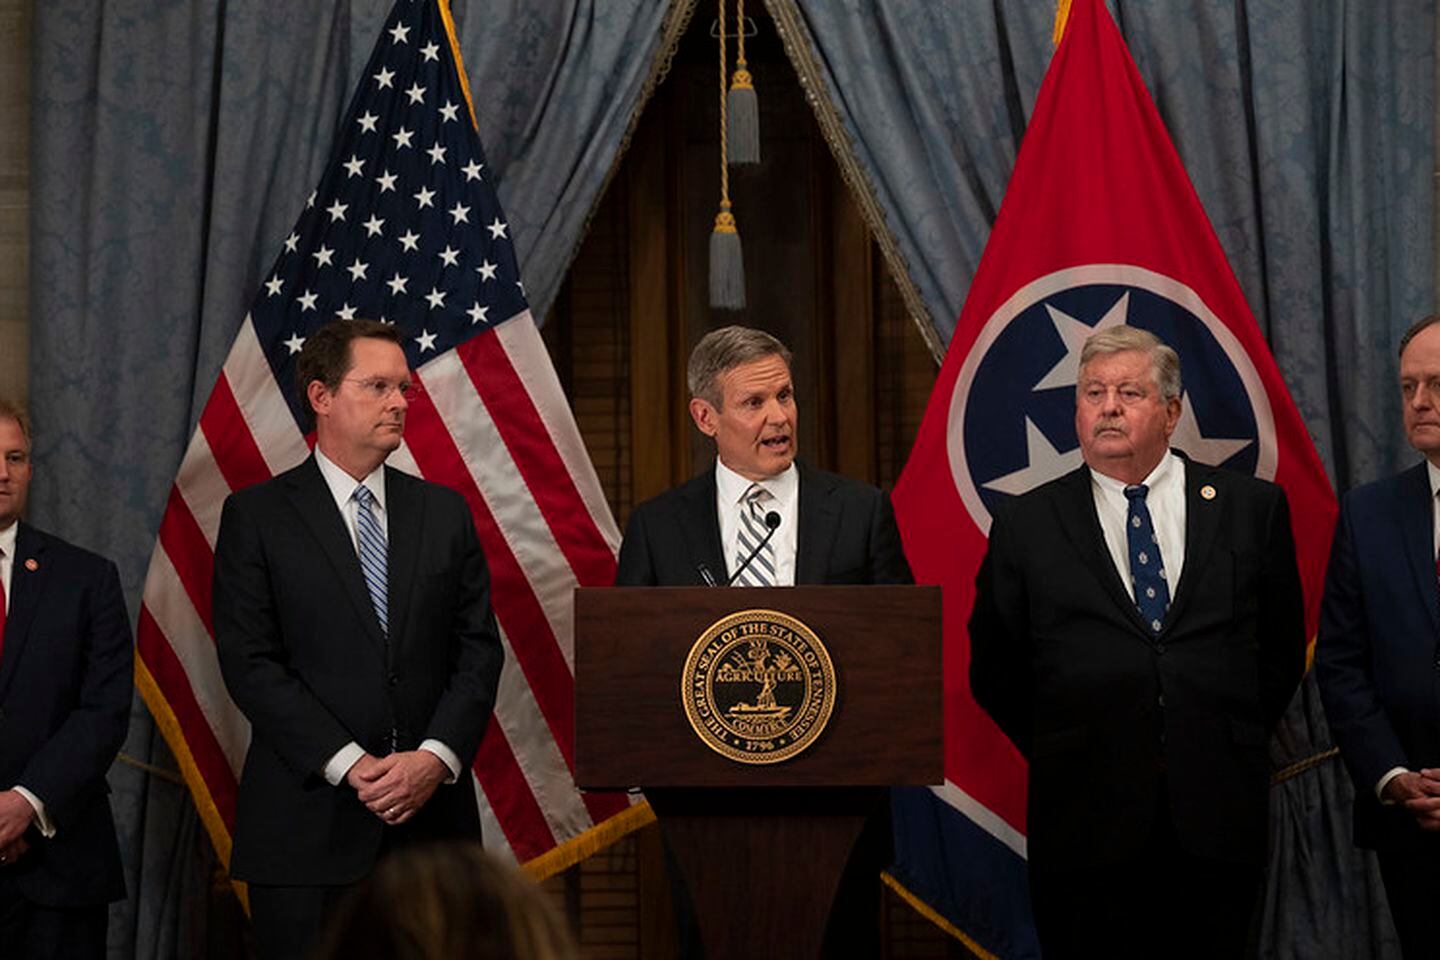 Gov. Bill Lee, flanked by GOP legislative leaders, speaks during a press conference at the close of the 2021 session of the Tennessee General Assembly.